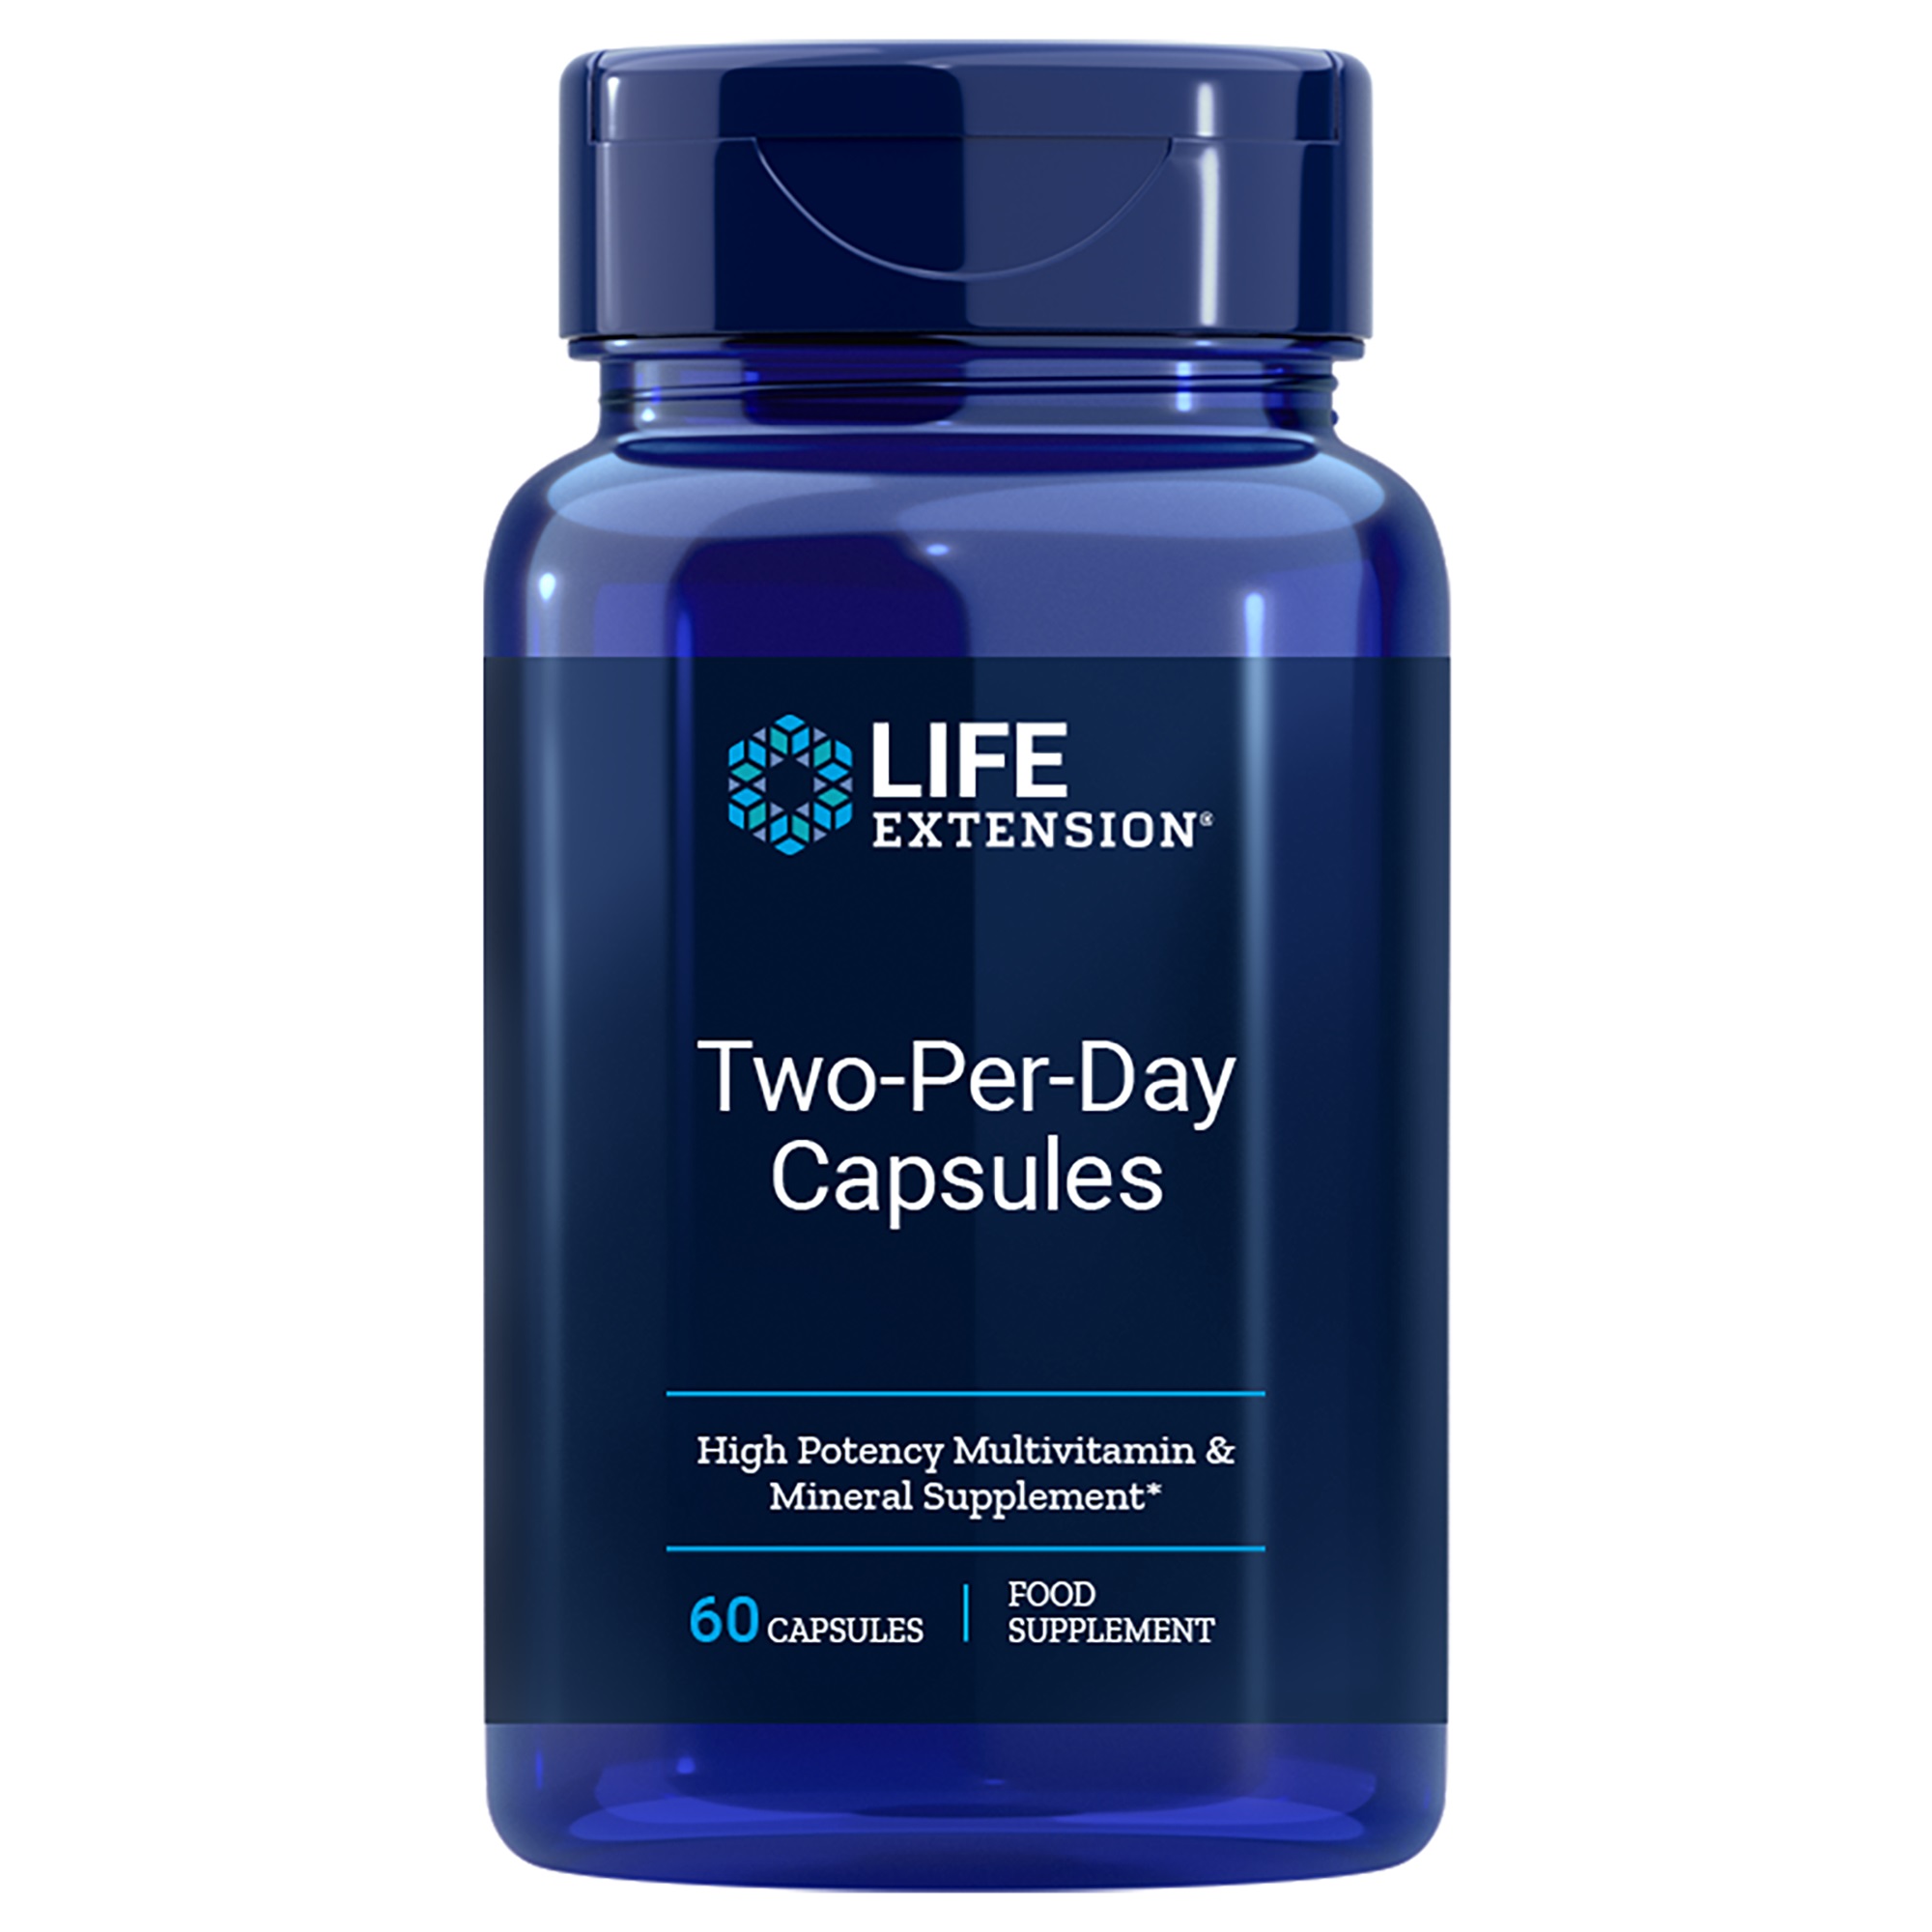 LifeExtension Two-Per-Day Capsules